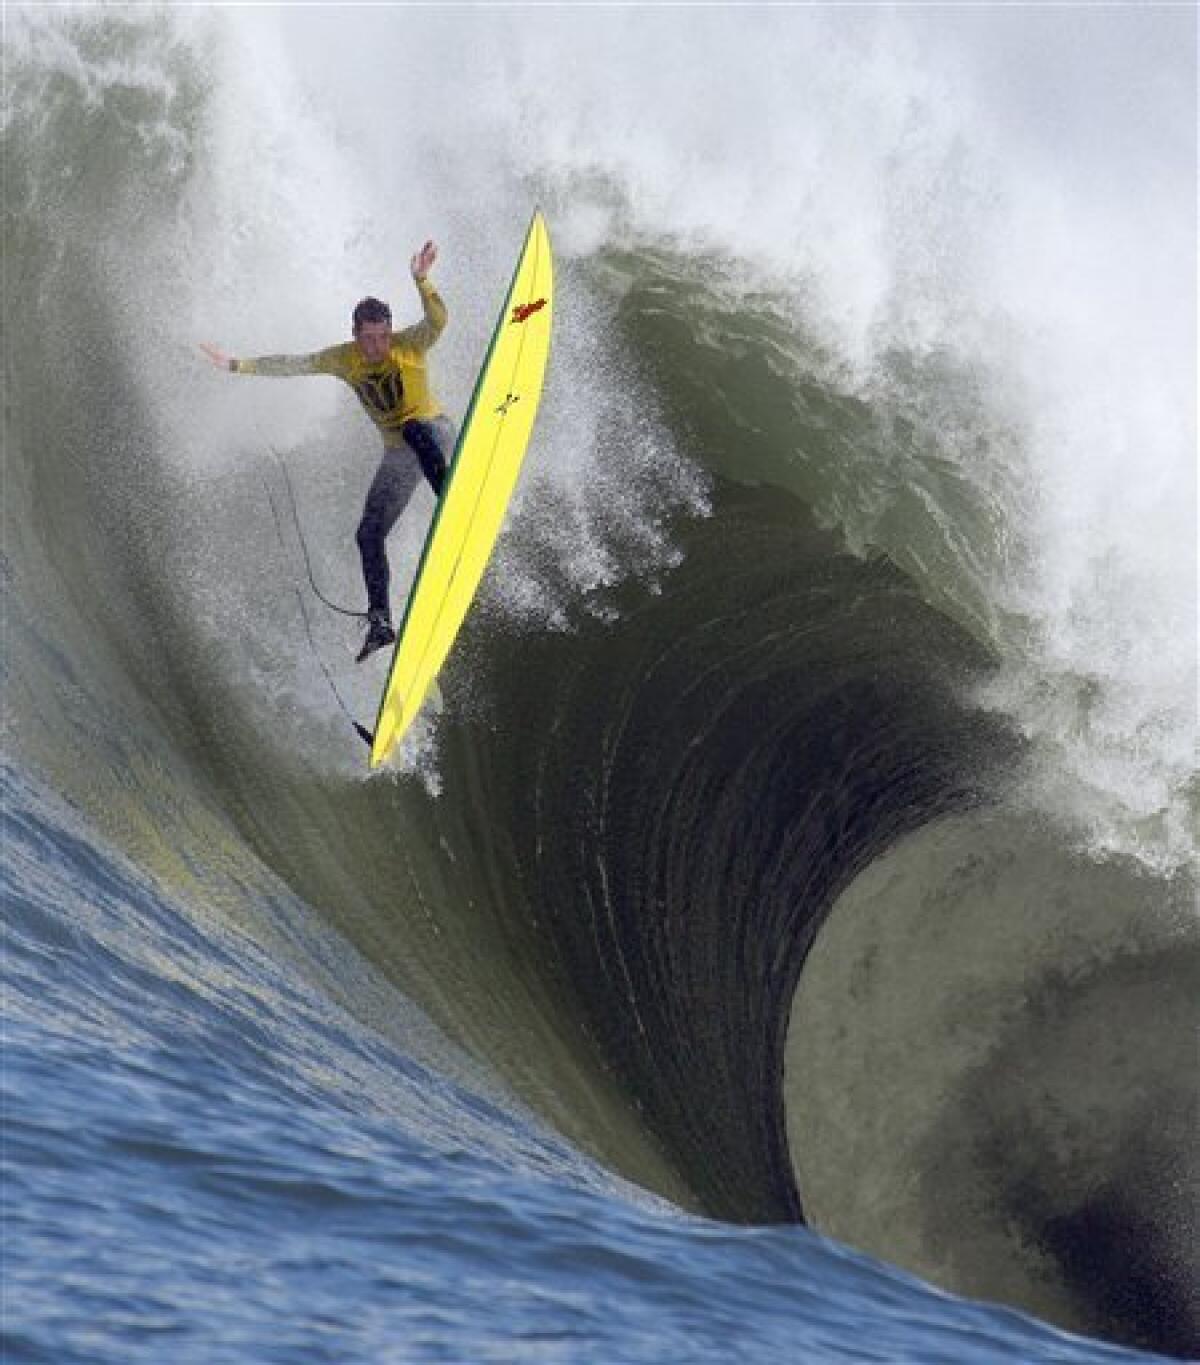 Was This Past Mavericks Swell a Harbinger for an Epic Big-Wave Season? -  Surfer